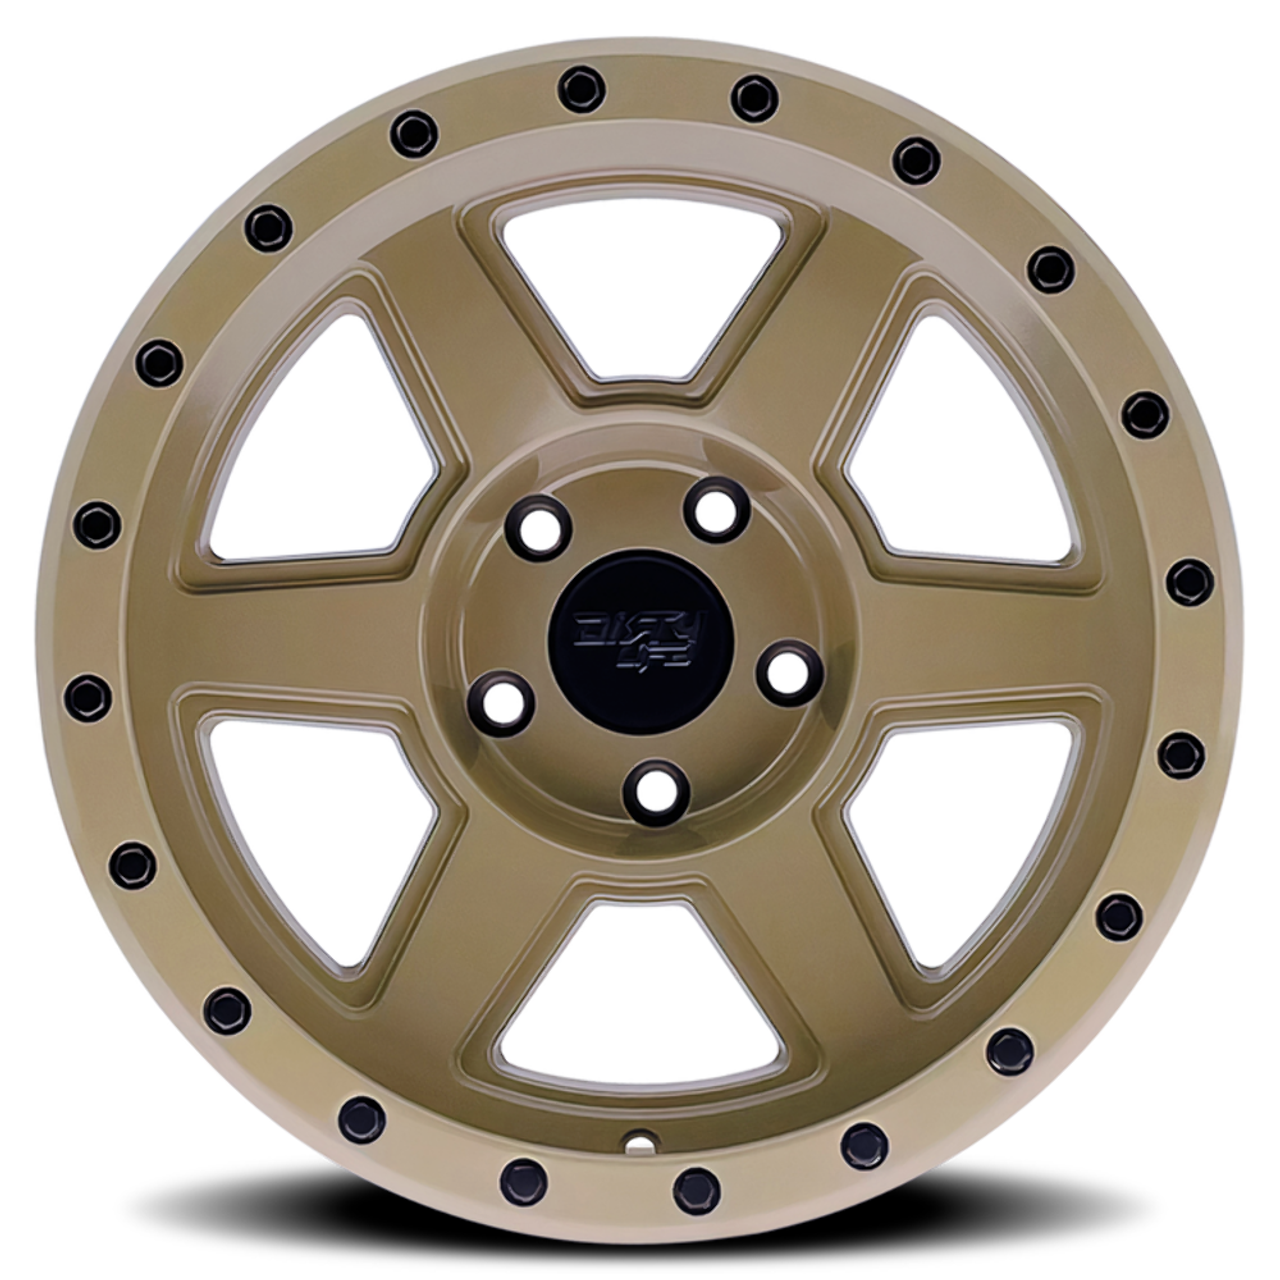 Set 4 17" Dirty Life Compound 17x9 Desert Sand 6x5.5 Wheels -12mm Lifted Rims